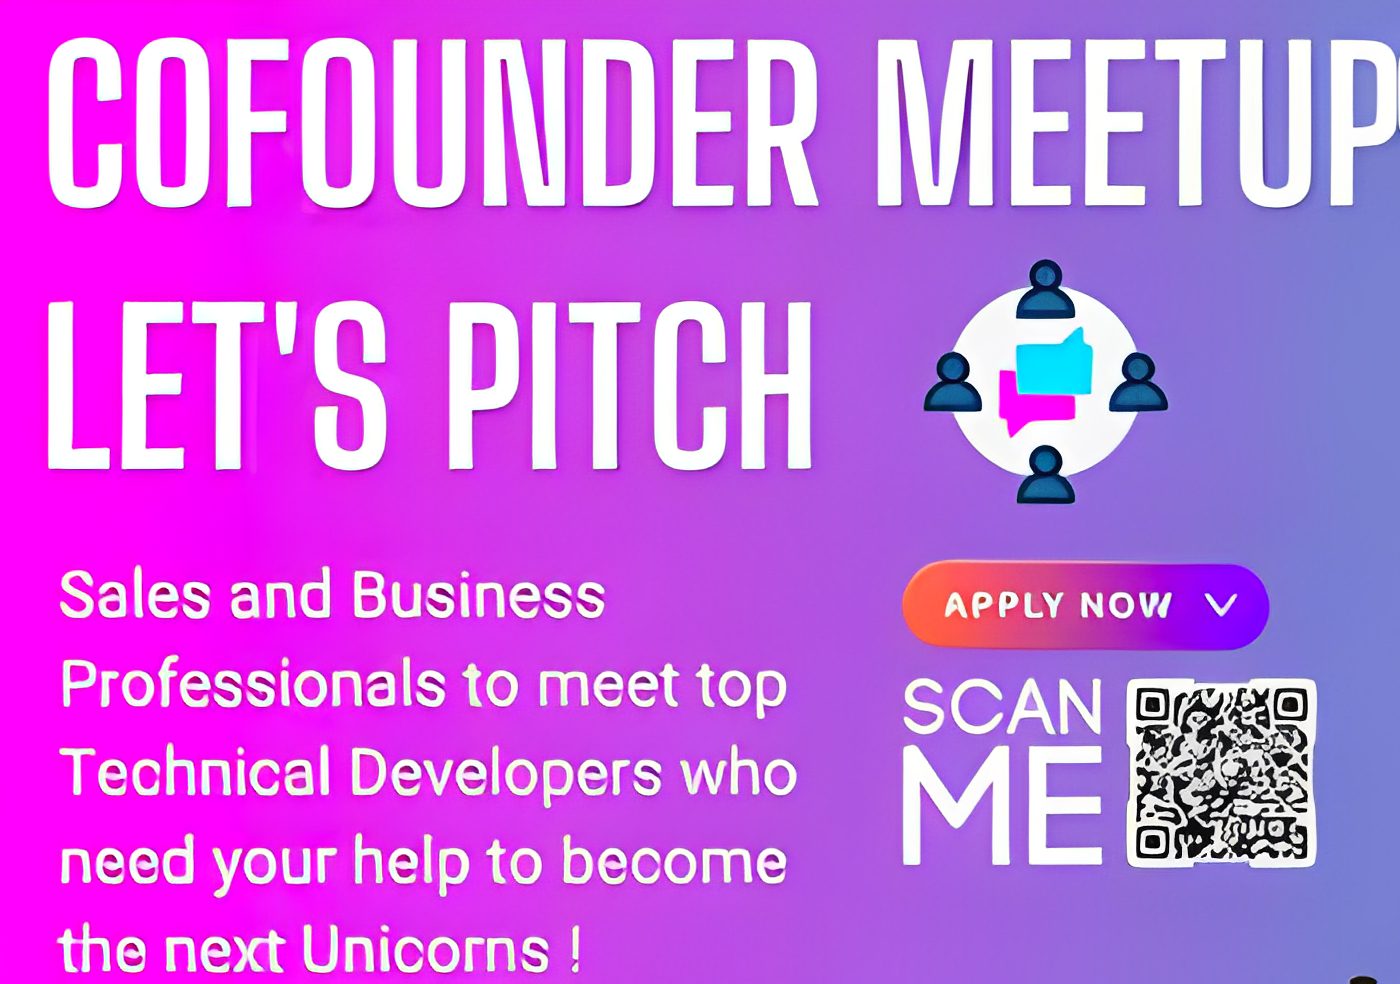 CoFounder Meetup – Let's Pitch in 60 seconds